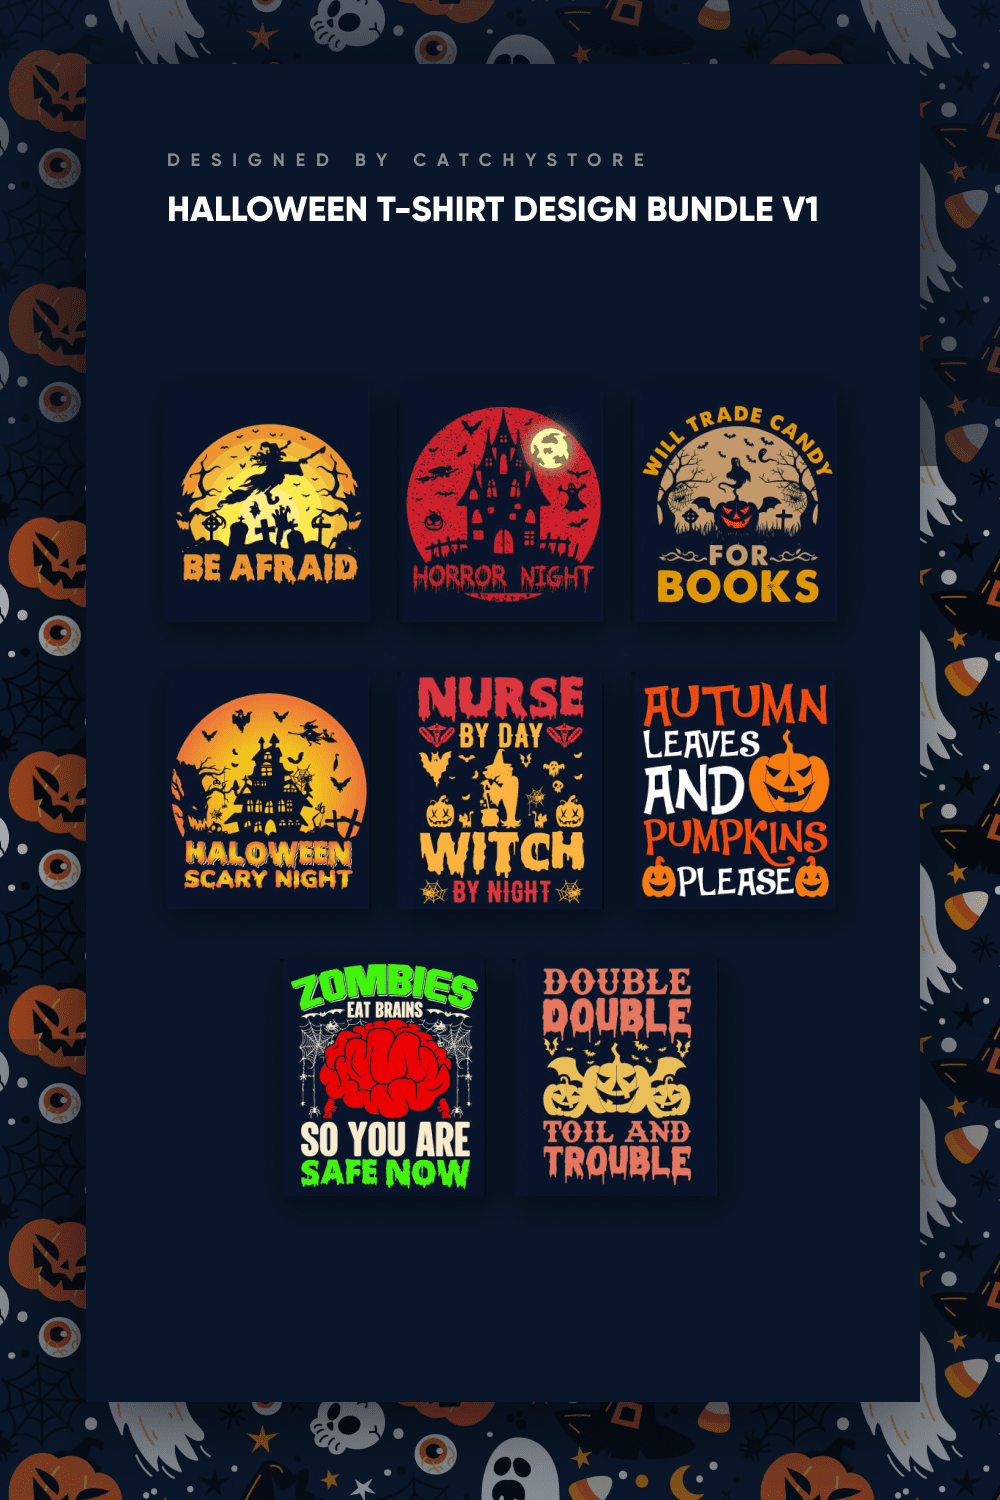 Happy halloween PNG Designs for T Shirt & Merch